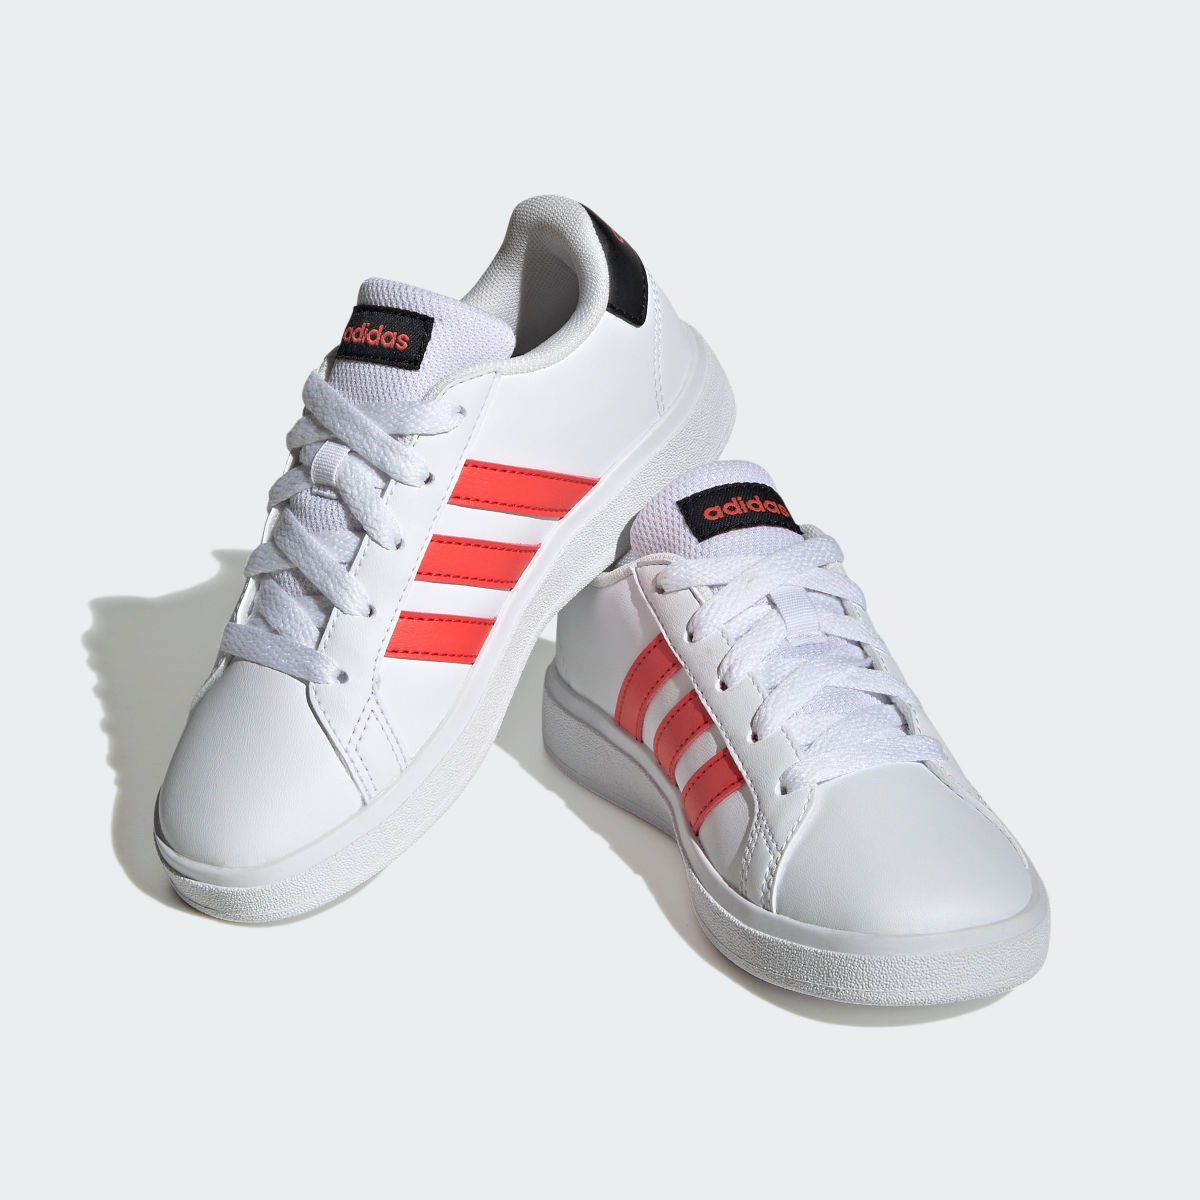 Adidas Buty Grand Court Lifestyle Tennis Lace-Up. 5